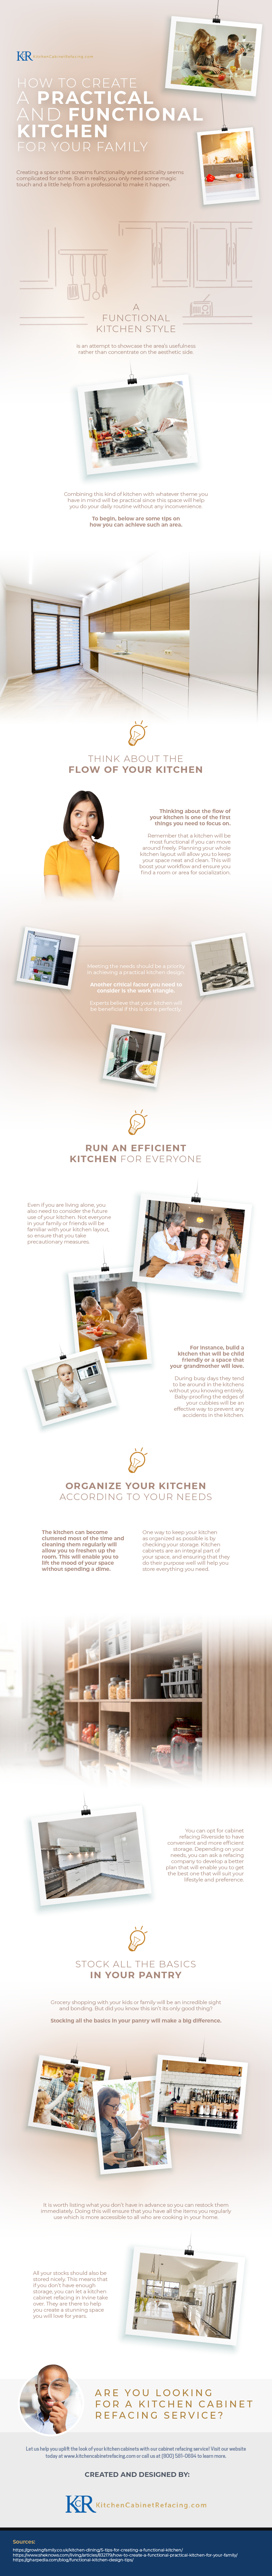 How_To_Create_a_Practical_and_Functional_Kitchen_for_Your_Family_image_1